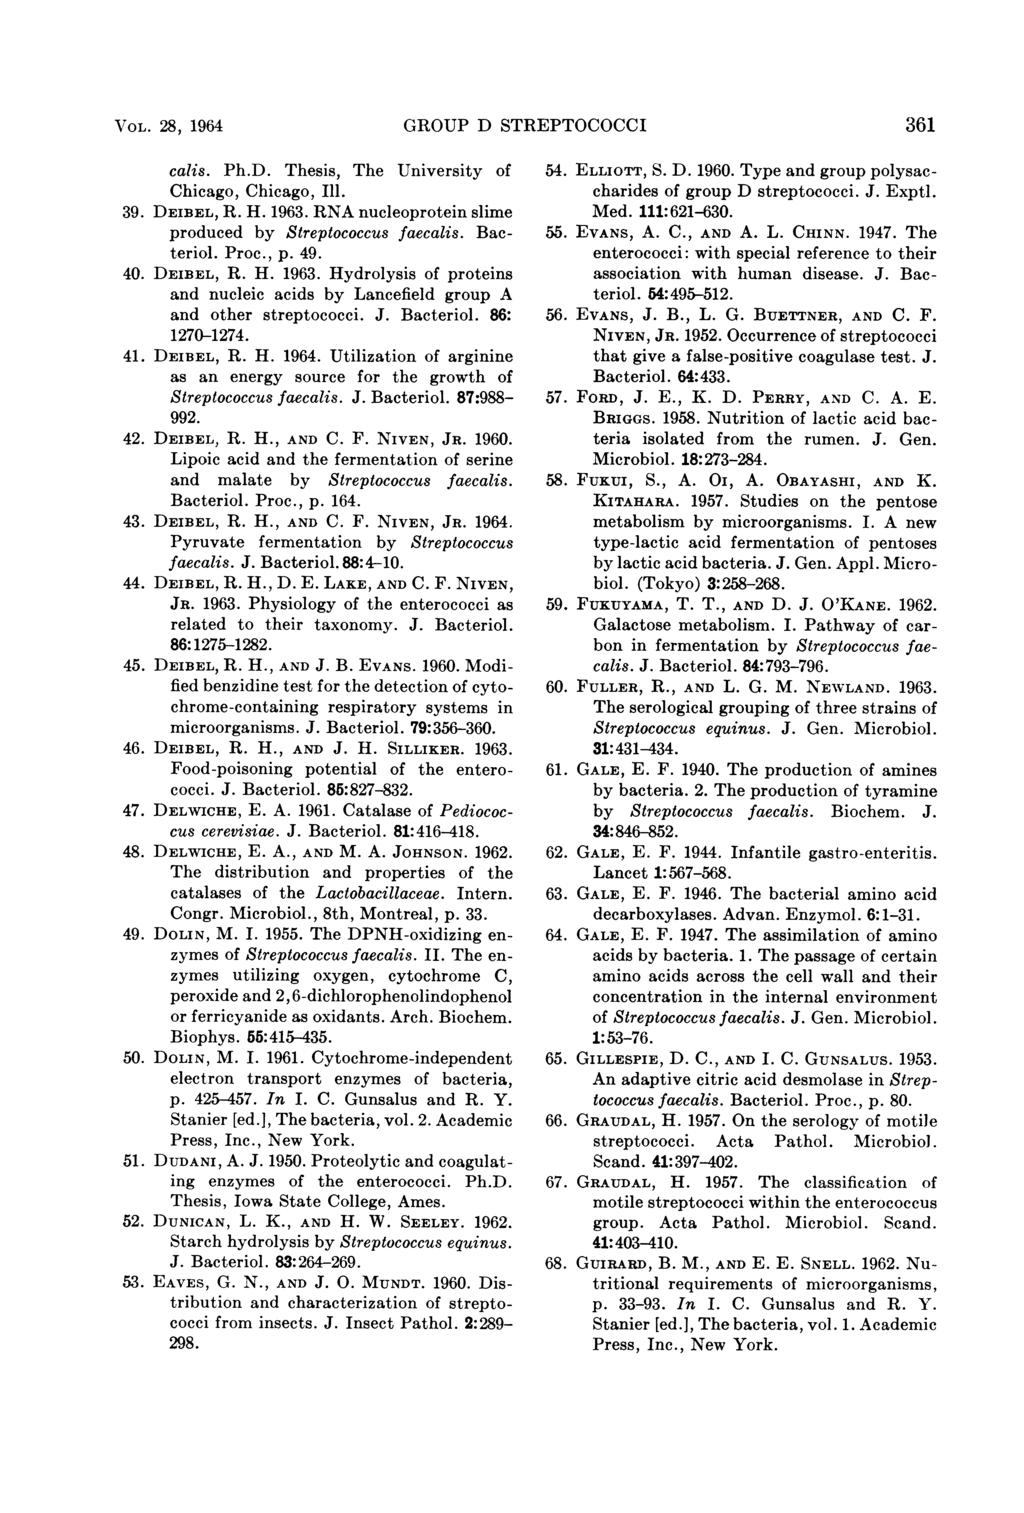 VOL. 28, 1964 GROUP D STREPTOCOCCI 361 calis. Ph.D. Thesis, The University of Chicago, Chicago, Ill. 39. DEIBEL, R. H. 1963. RNA nucleoprotein slime produced by Streptococcus faecalis. Bacteriol.